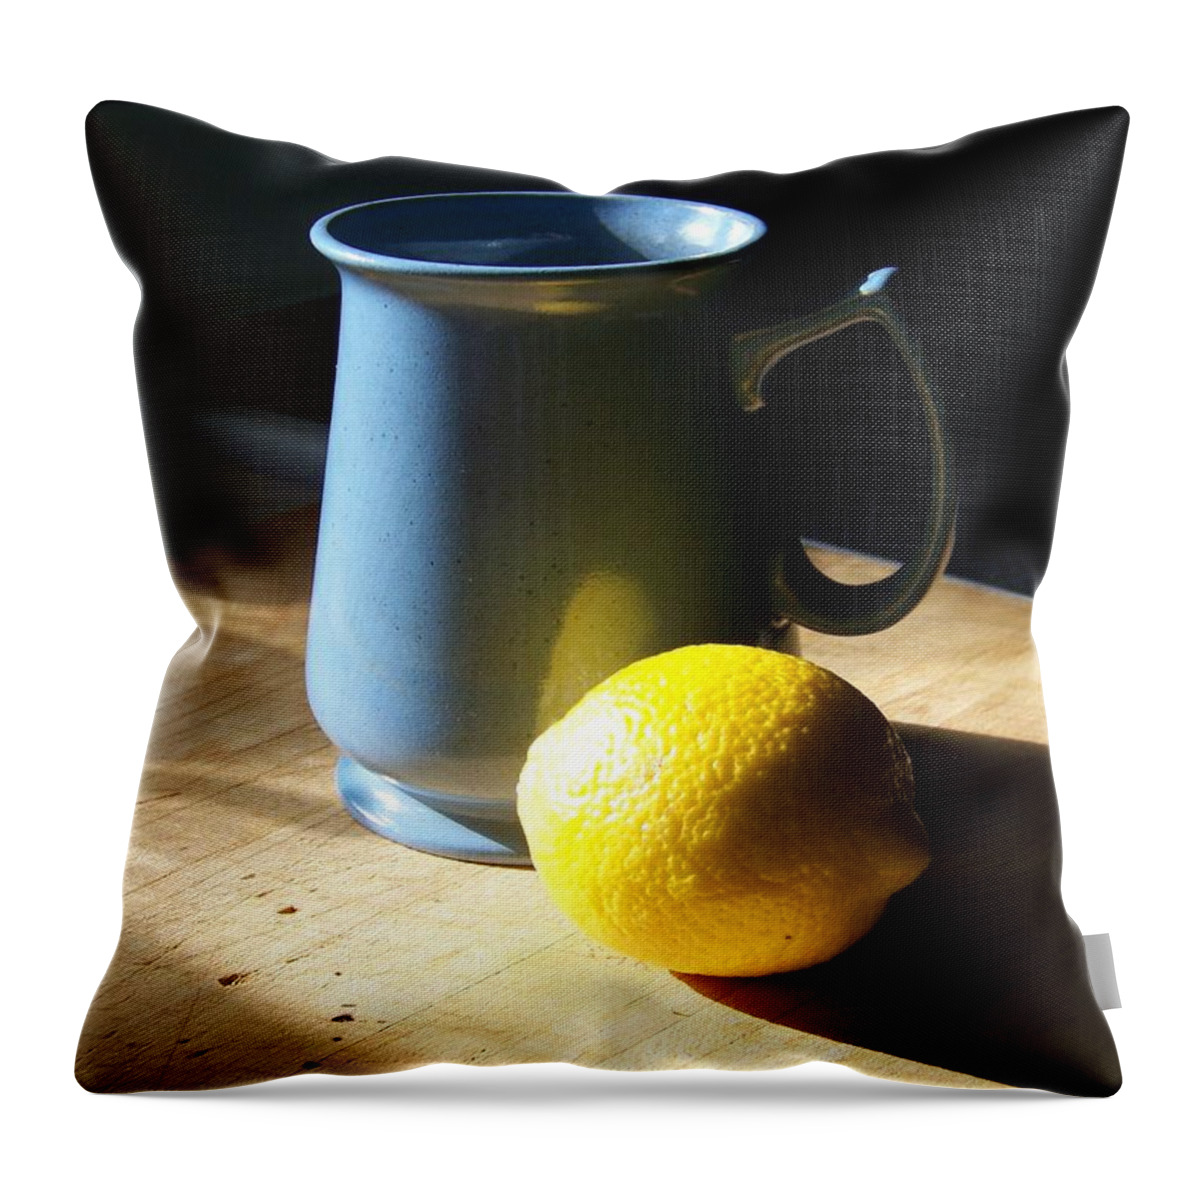 Blue Throw Pillow featuring the photograph On The Table 3 - Photograph by Jackie Mueller-Jones